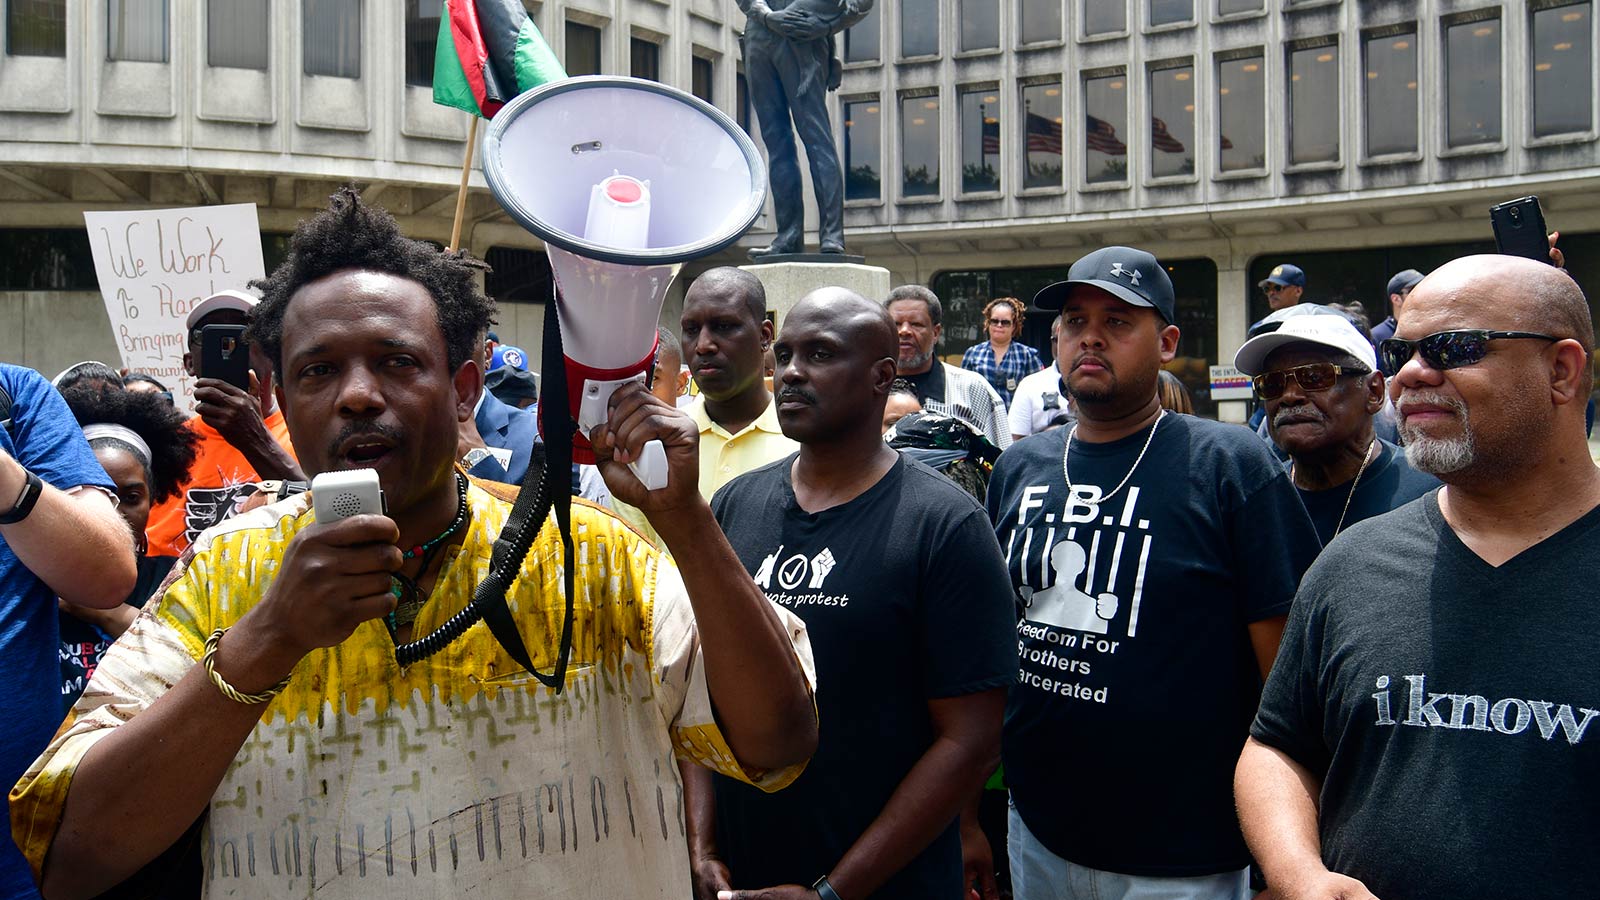 People outside Philadelphia’s police headquarters in 2019 demand the removal of officers from street duty after the commissioner announced an external review of racist or offensive social media posts.